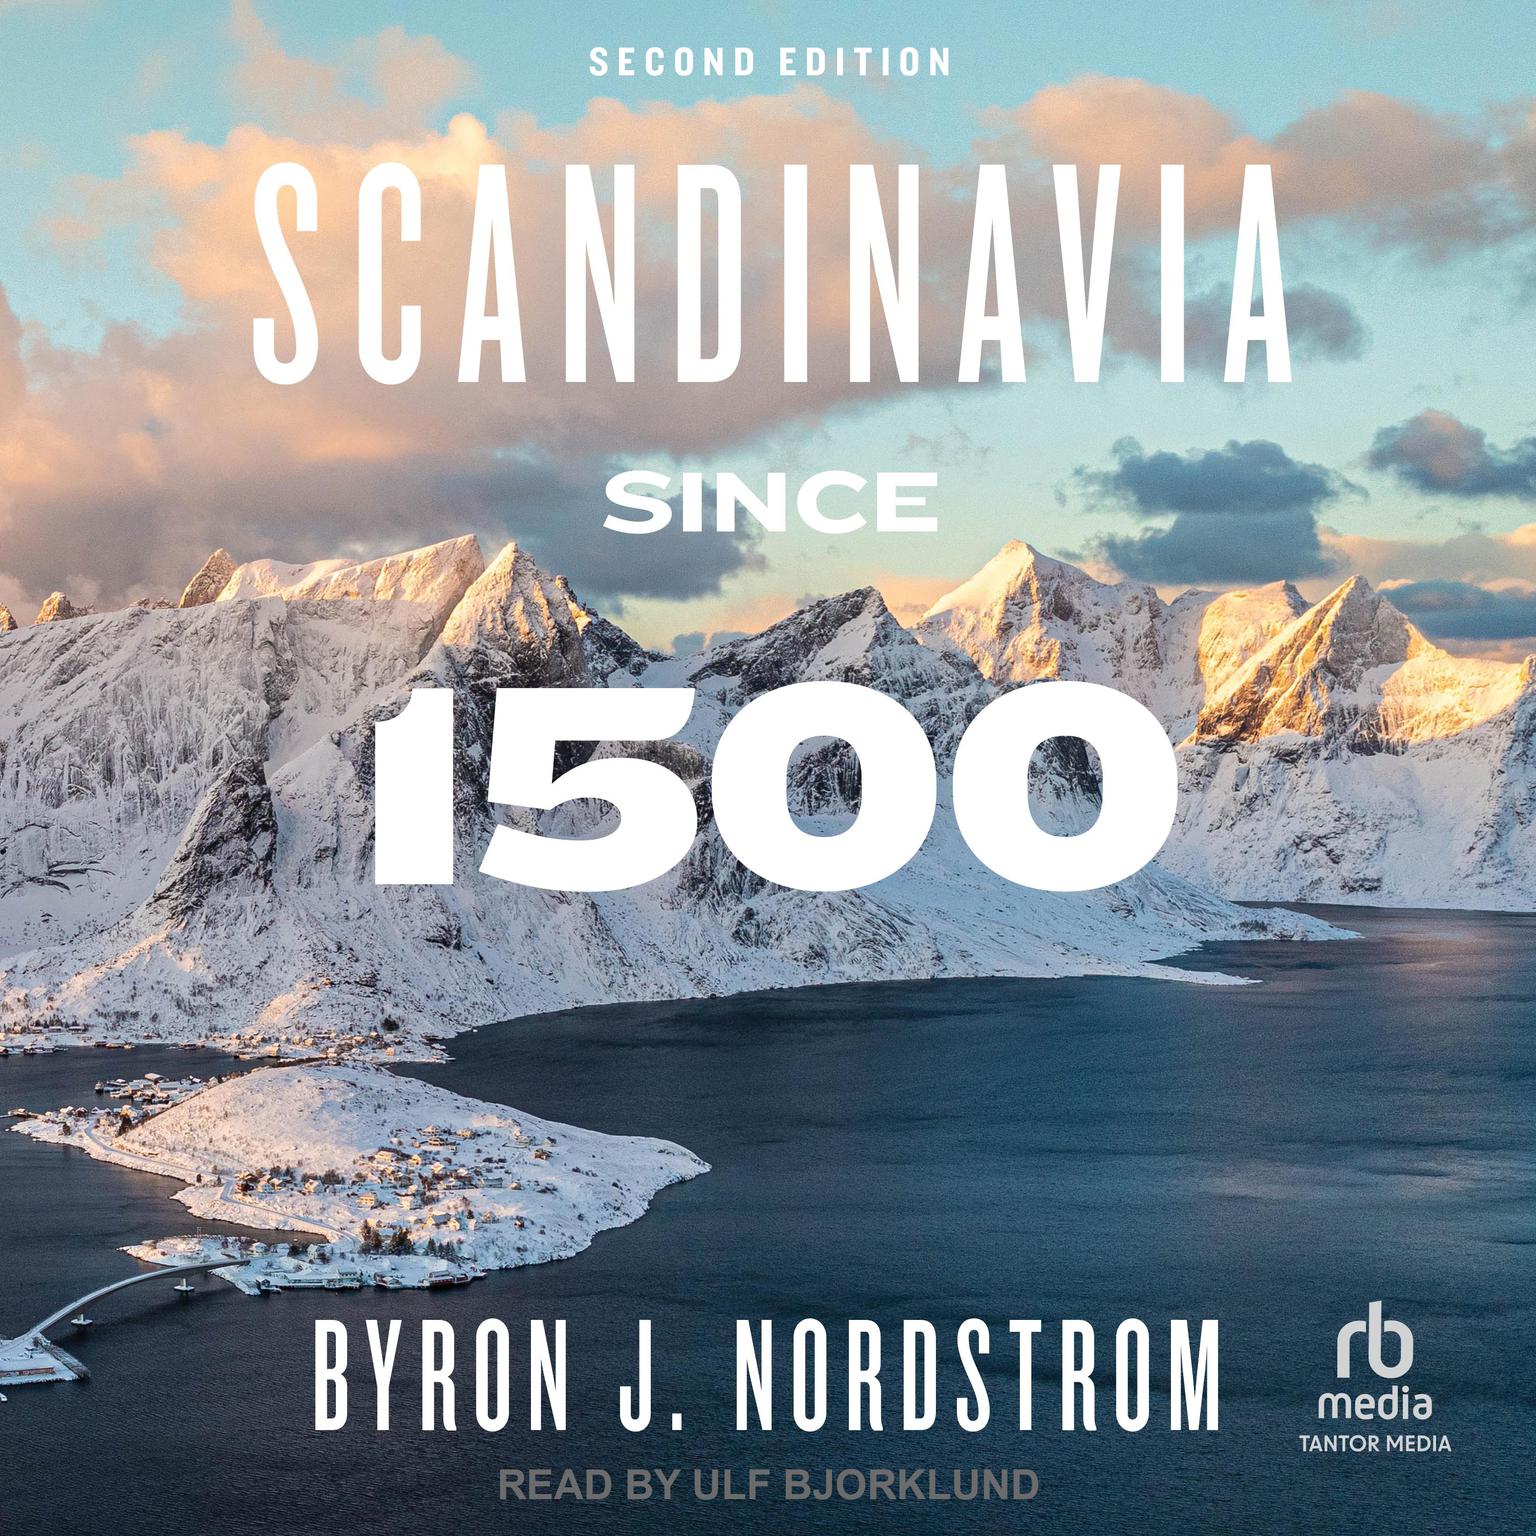 Scandinavia since 1500: Second Edition Audiobook, by Byron J. Nordstrom